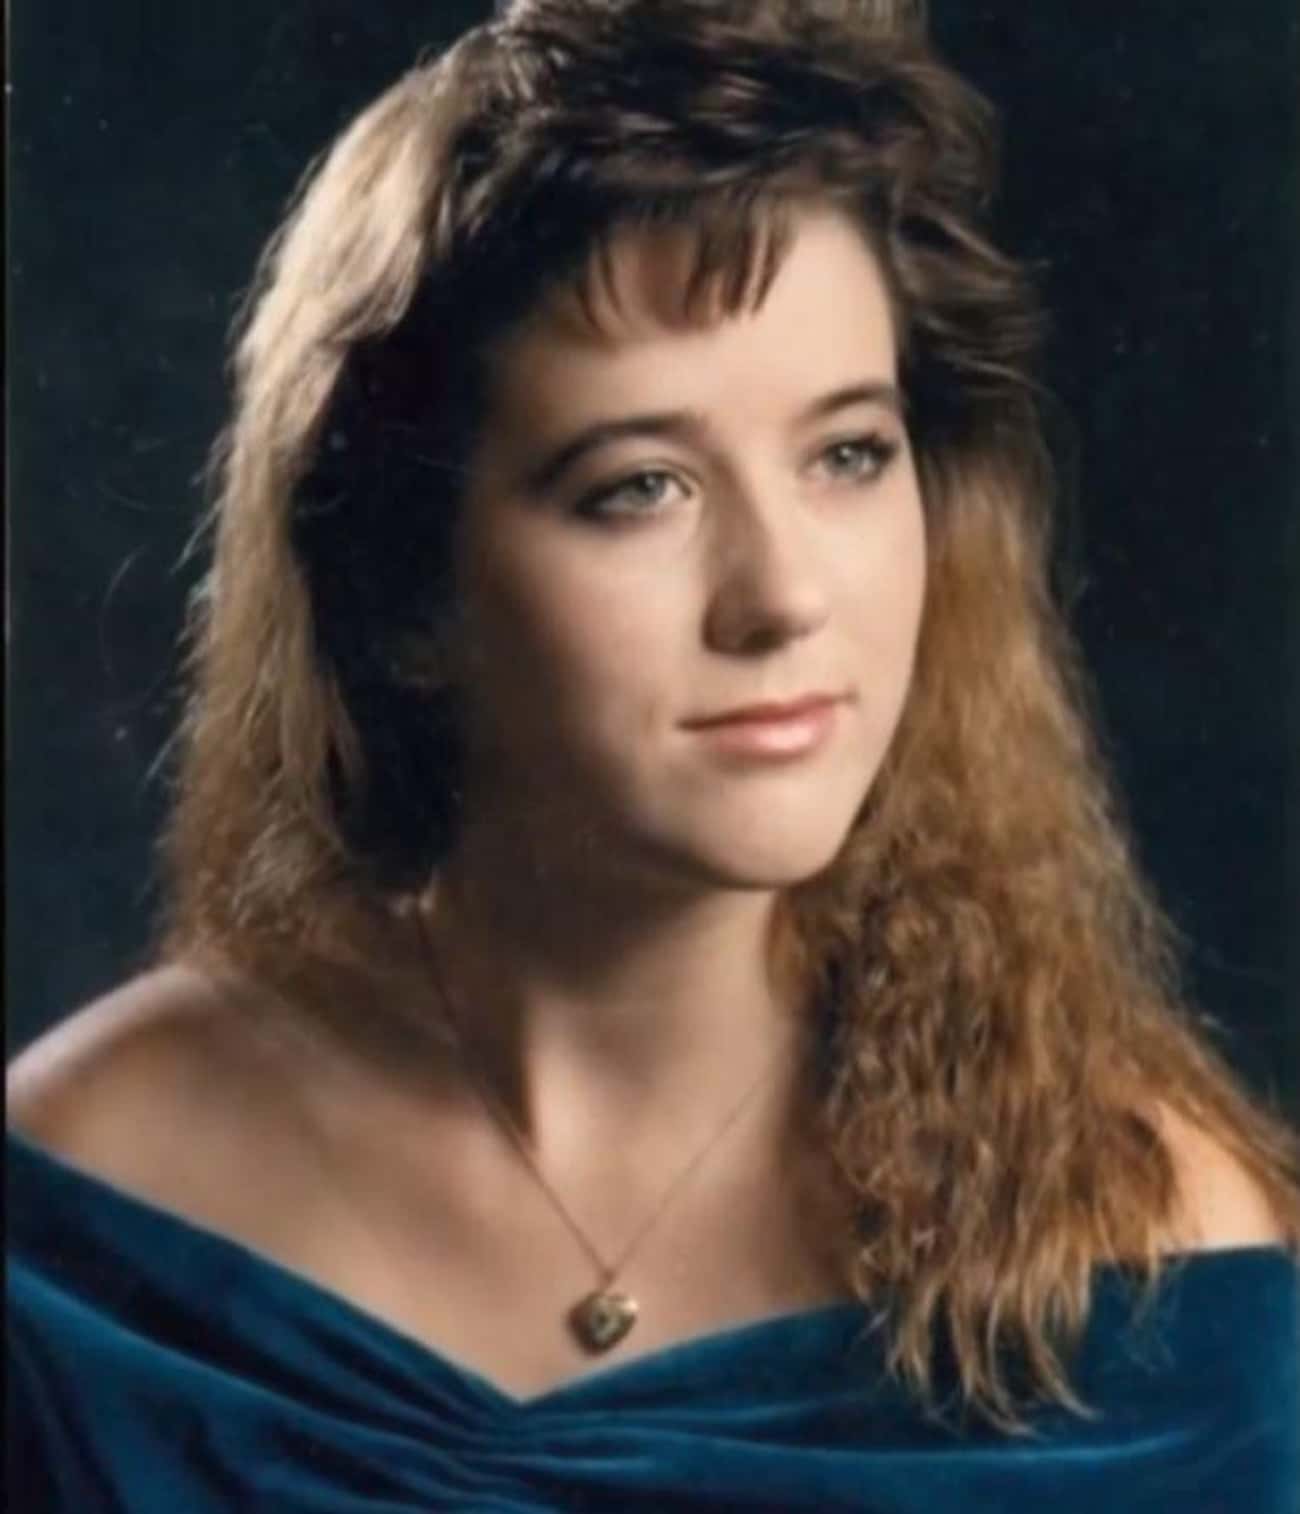 Some Believed The Polaroid Showed Tara Calico, Who Went Missing 1,600 Miles Away